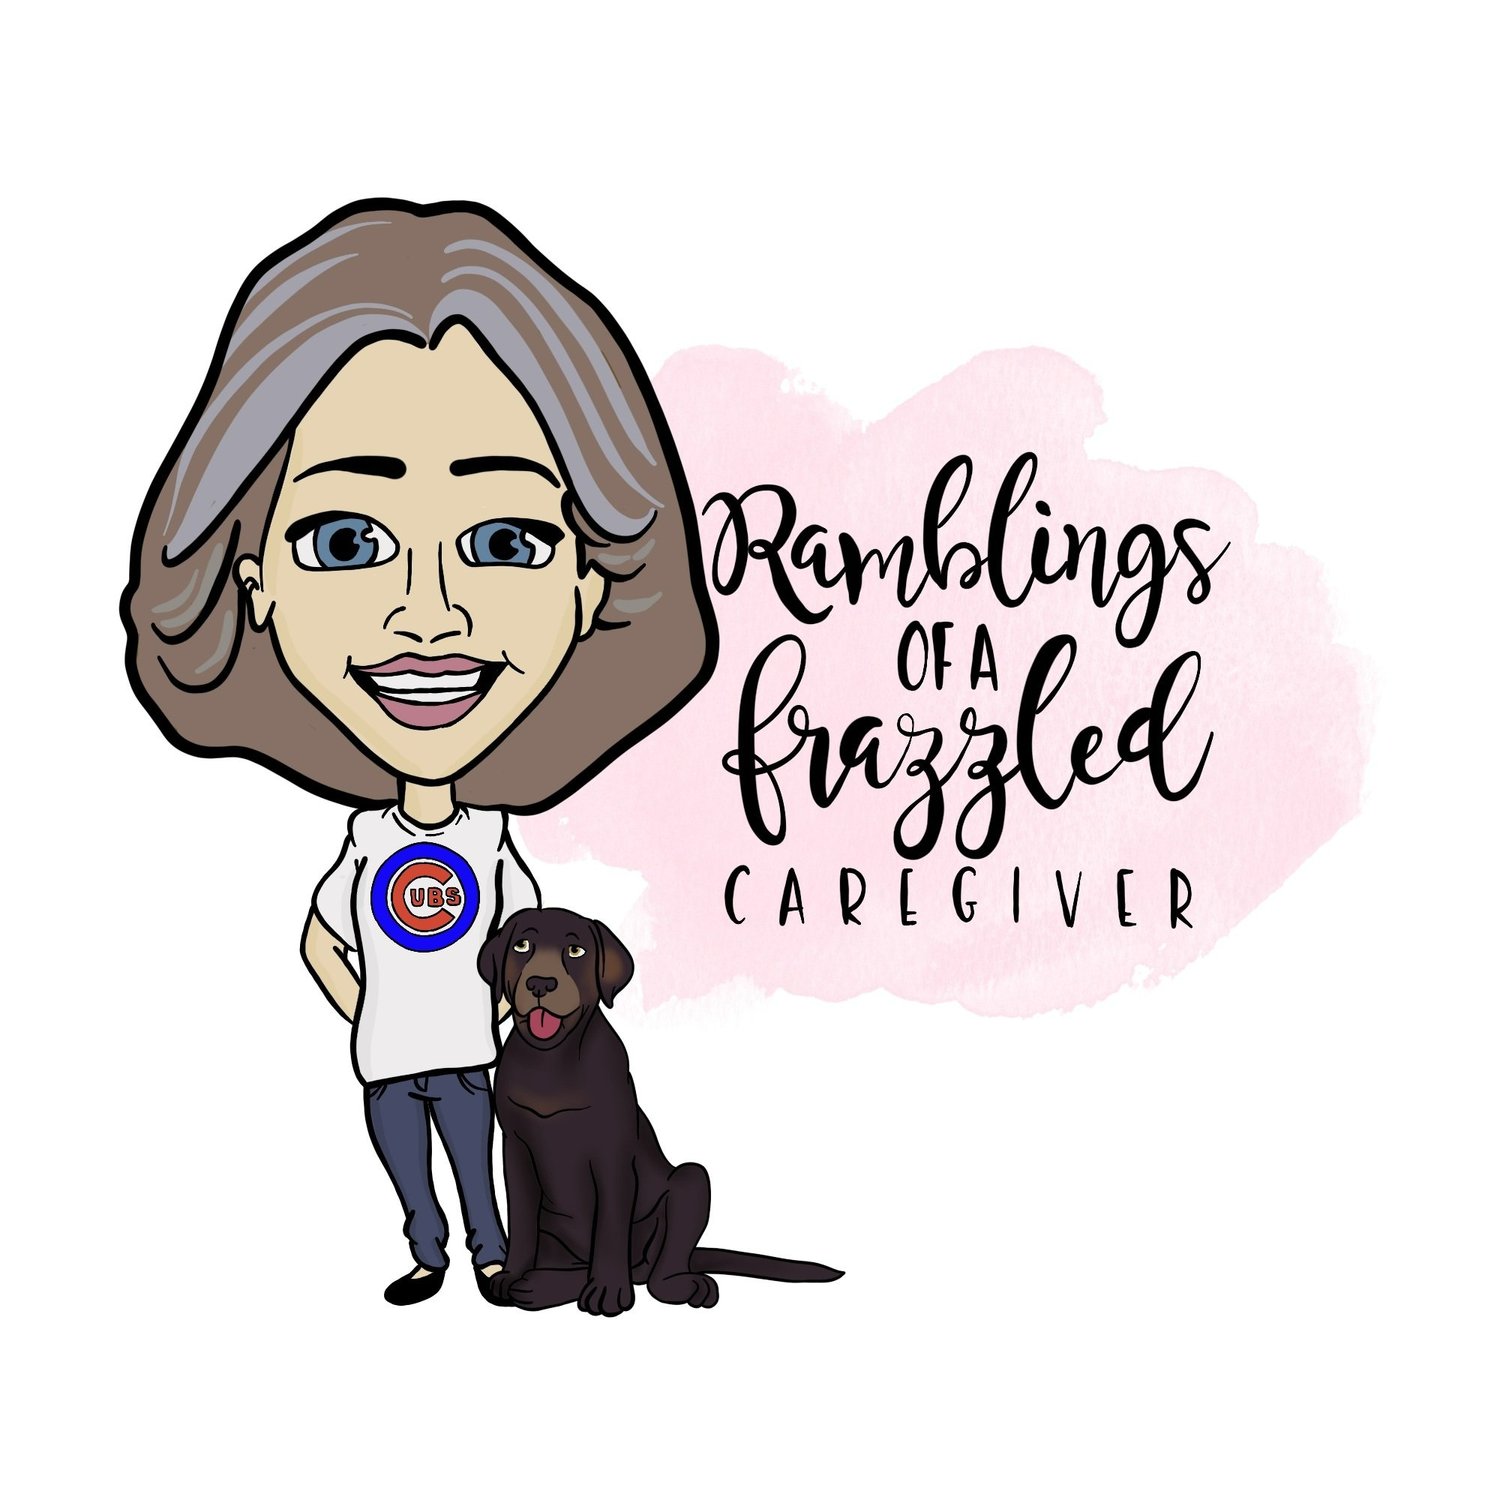 Ramblings of a frazzled caregiver